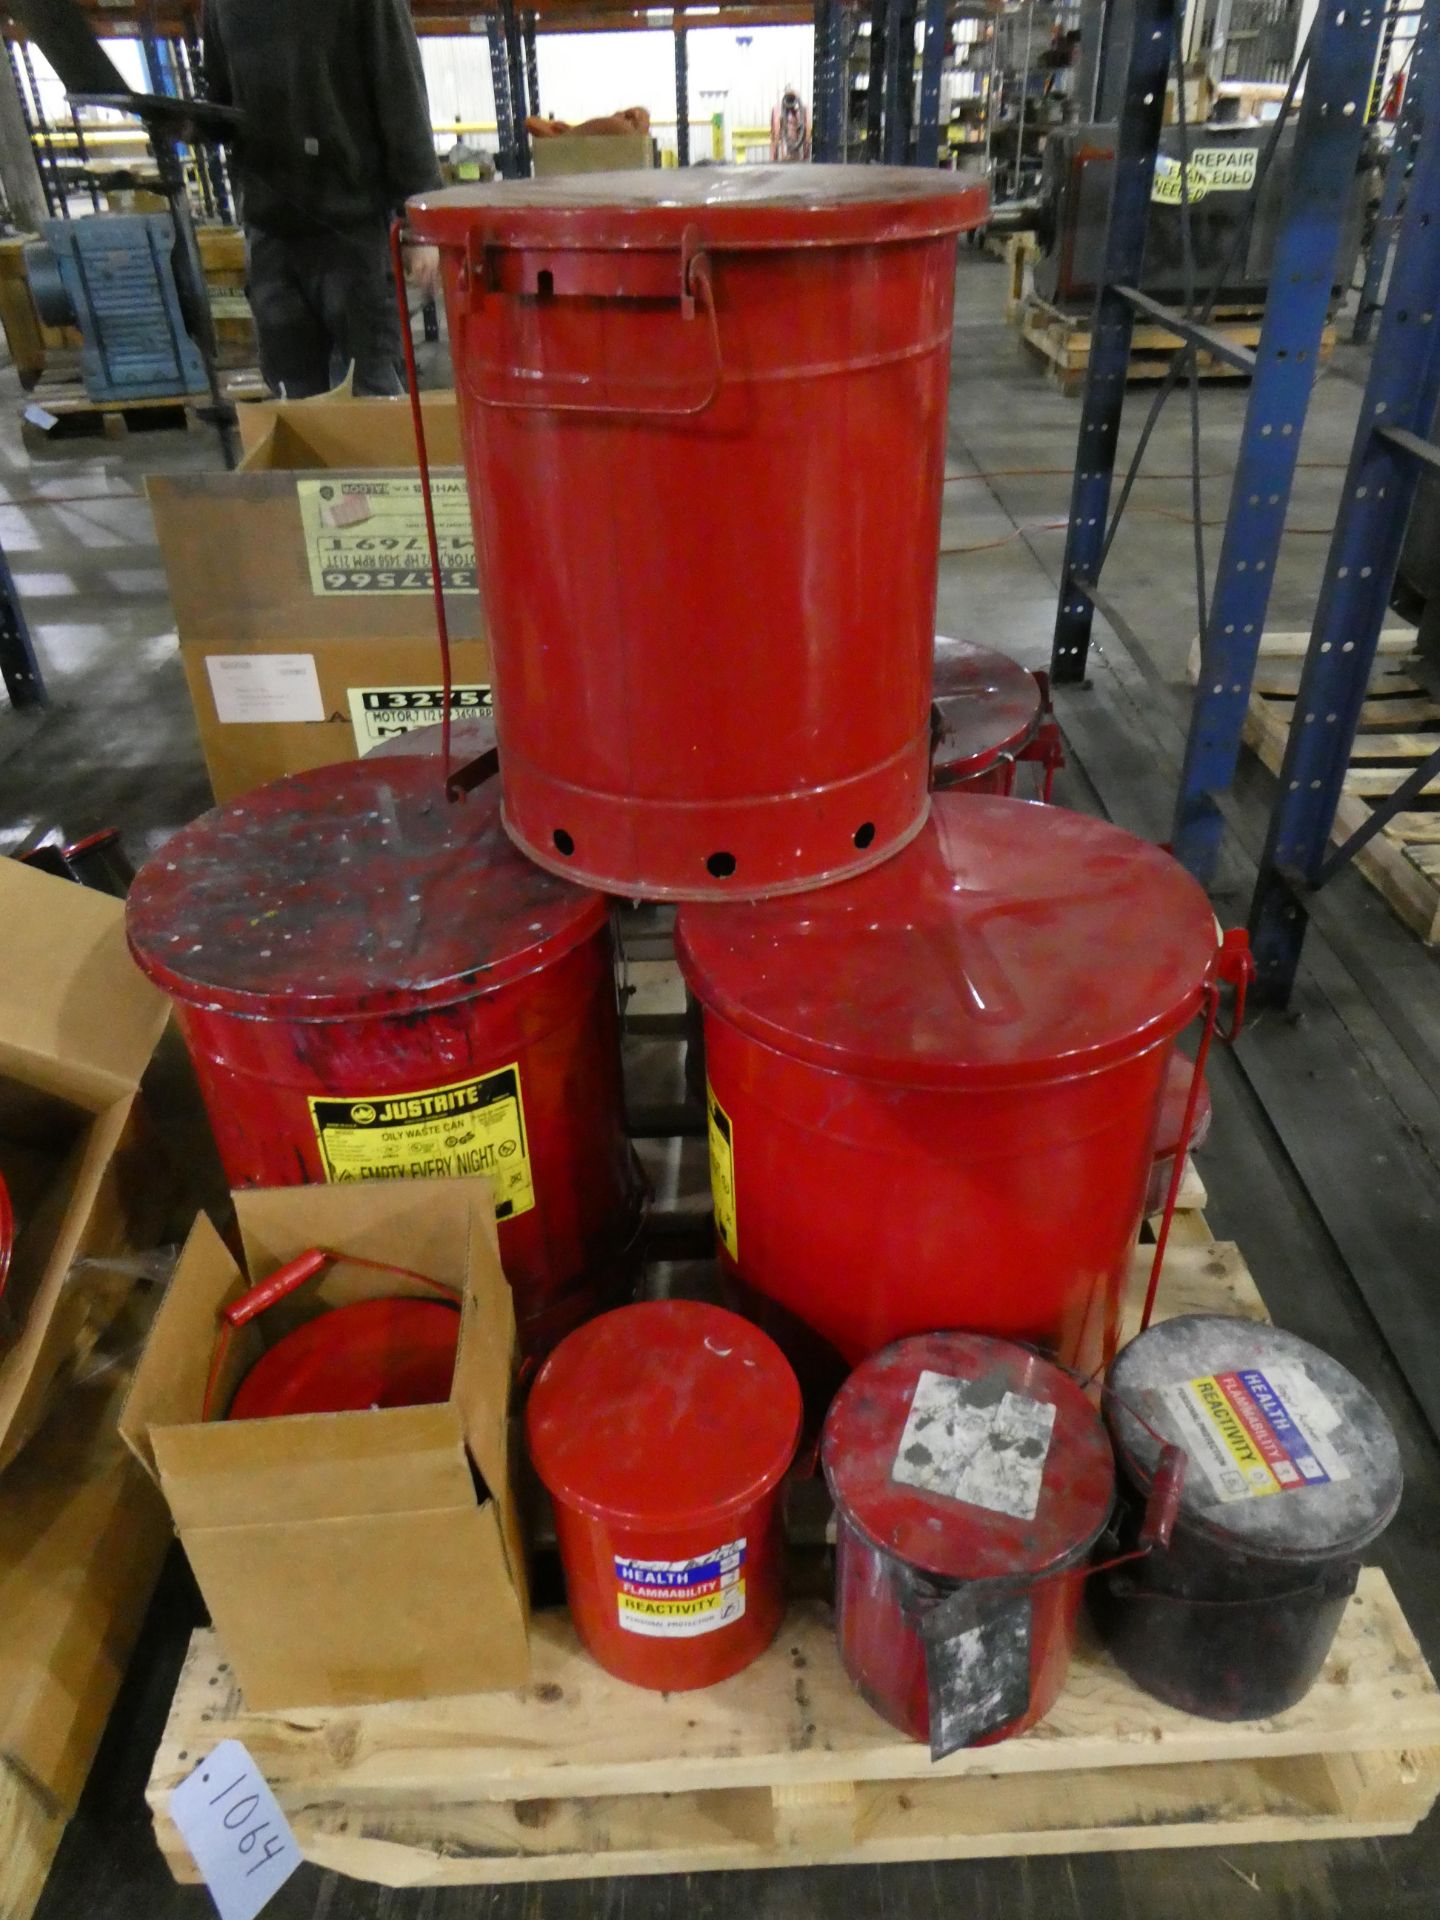 Justrite Oily Waste Cans